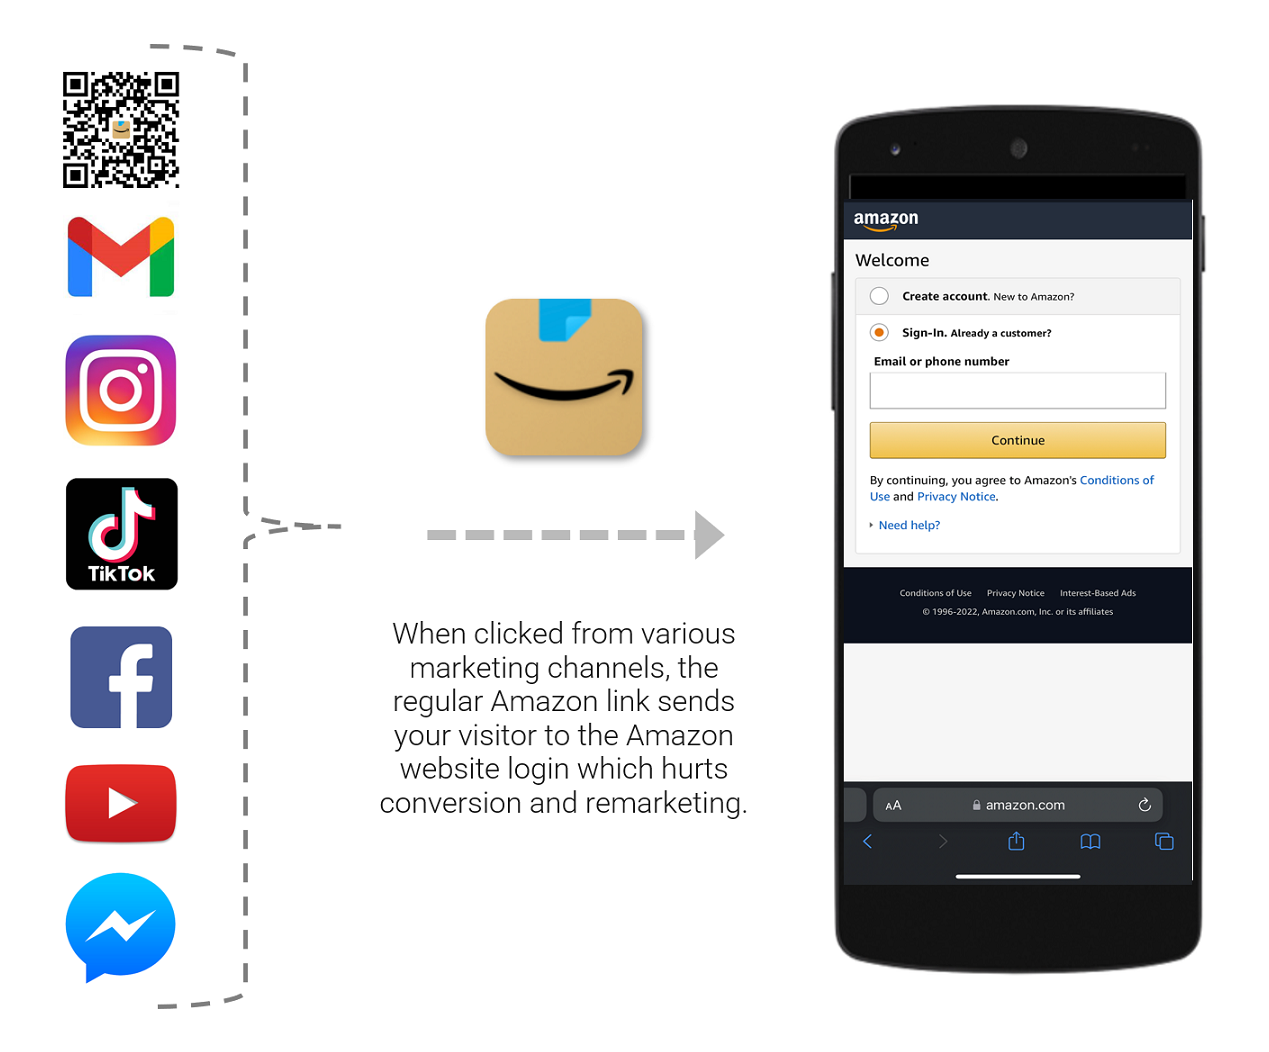 How to Brand Links that Open the Amazon App